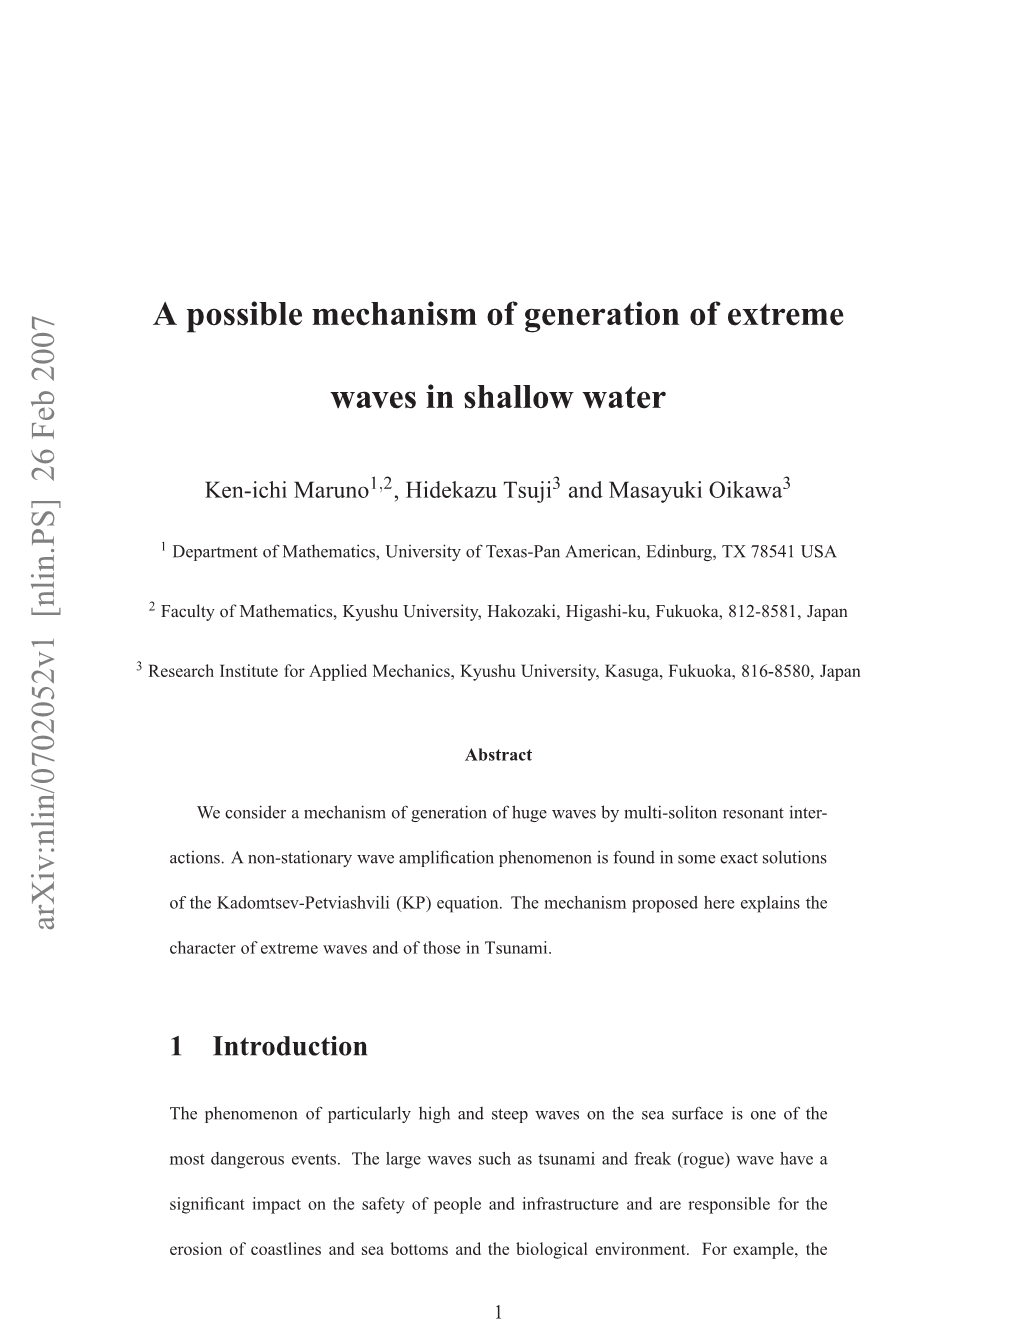 A Possible Mechanism of Generation of Extreme Waves in Shallow Water